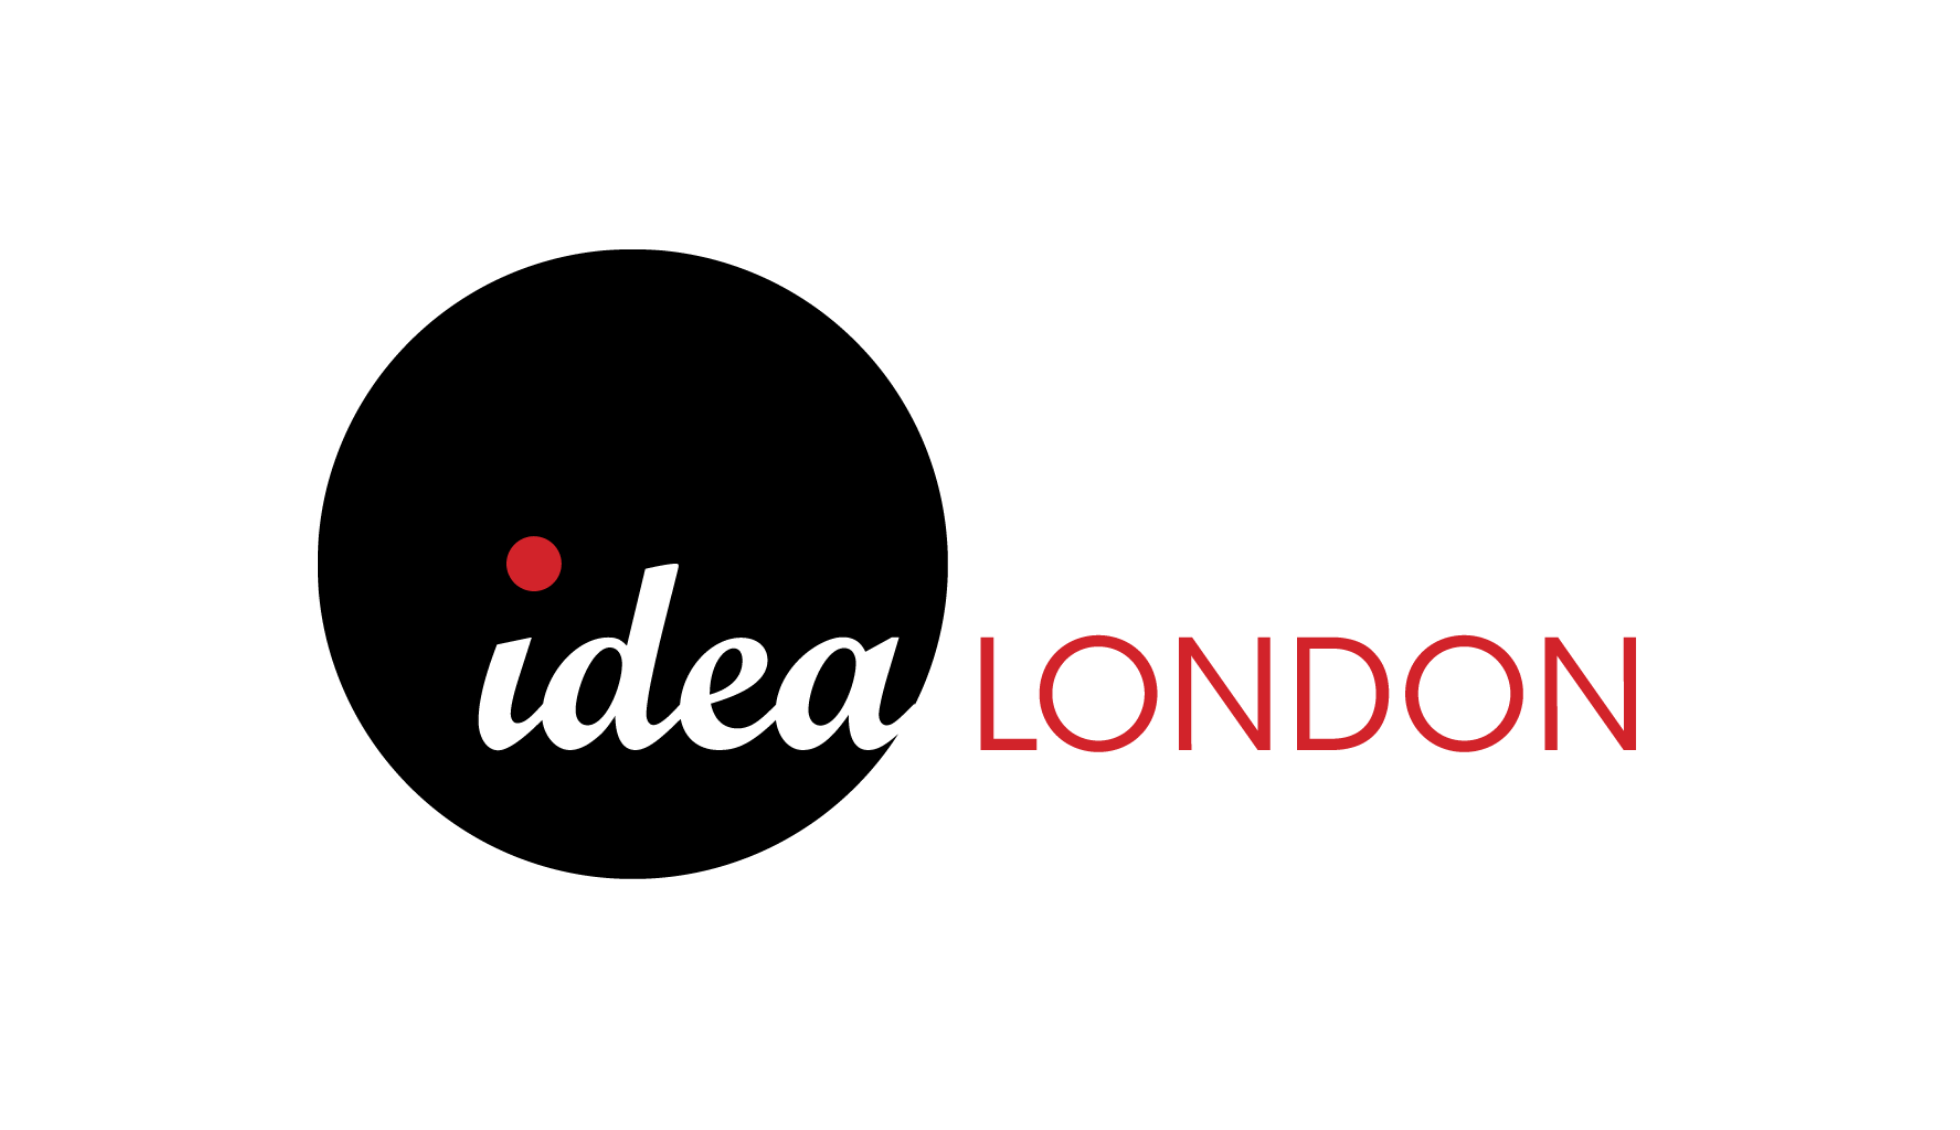 Six IDEAL months later - an update on our time at IDEALondon